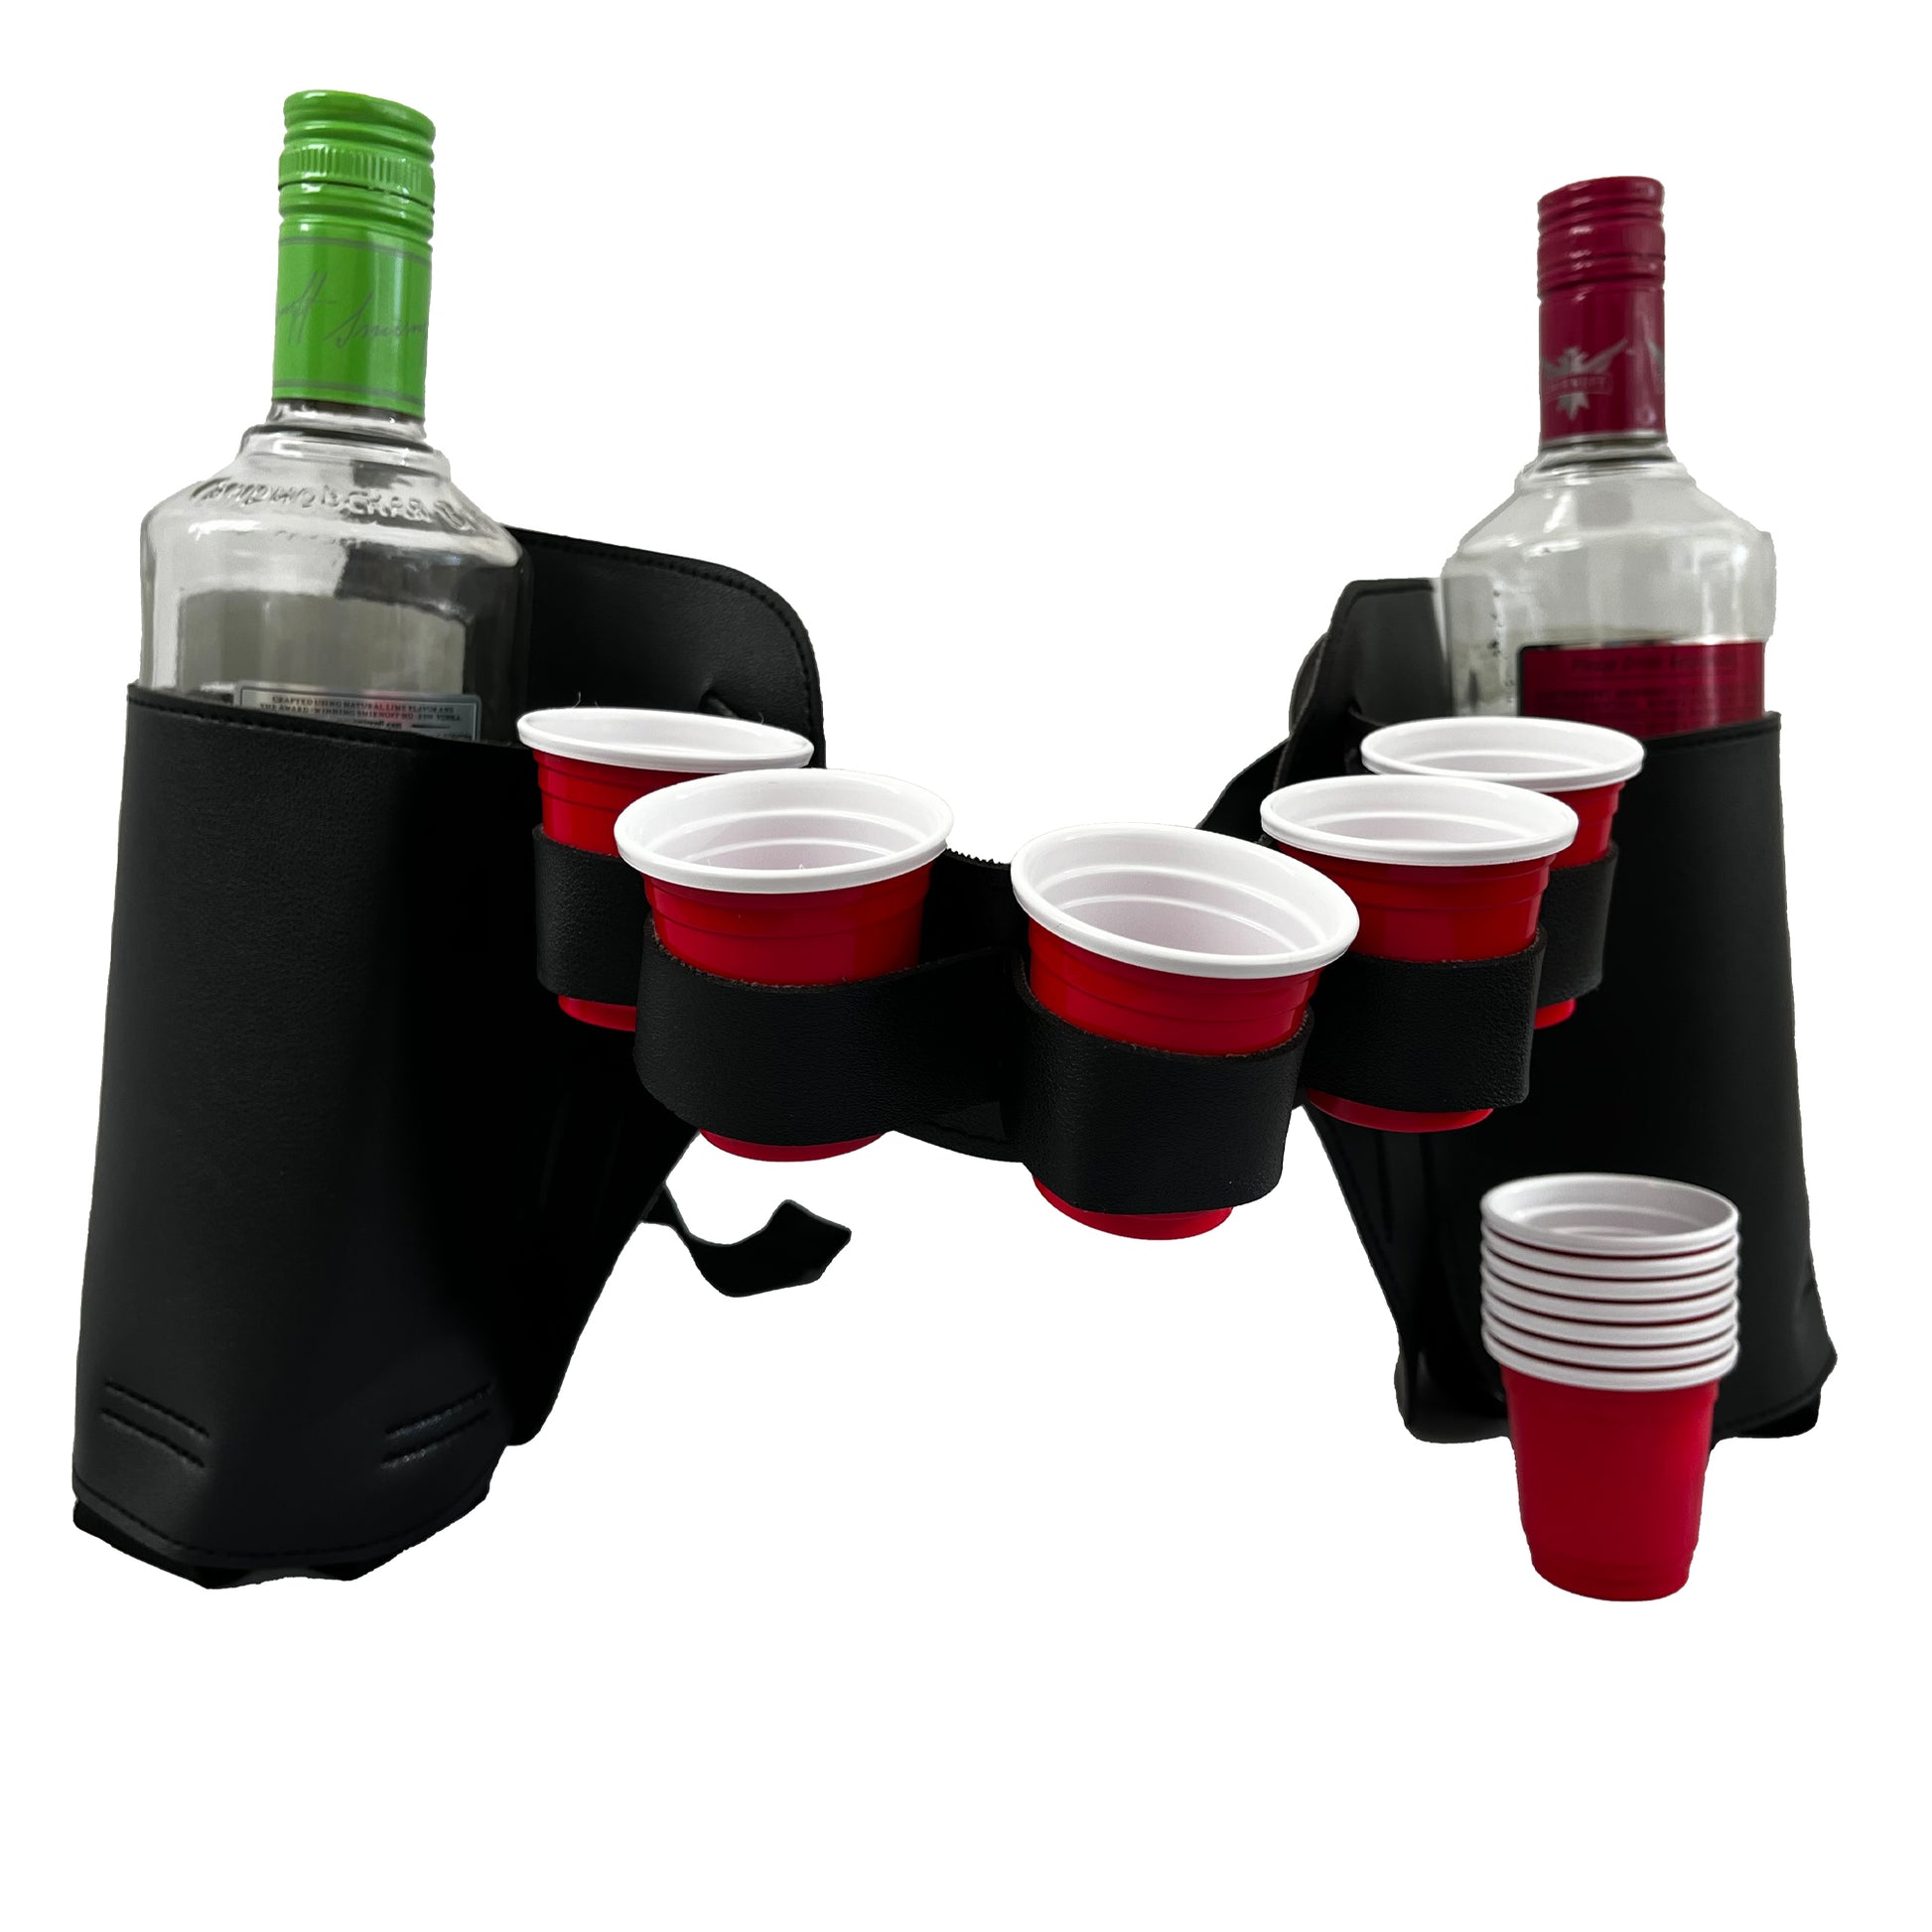 Black Liquor Hoslter with red cups